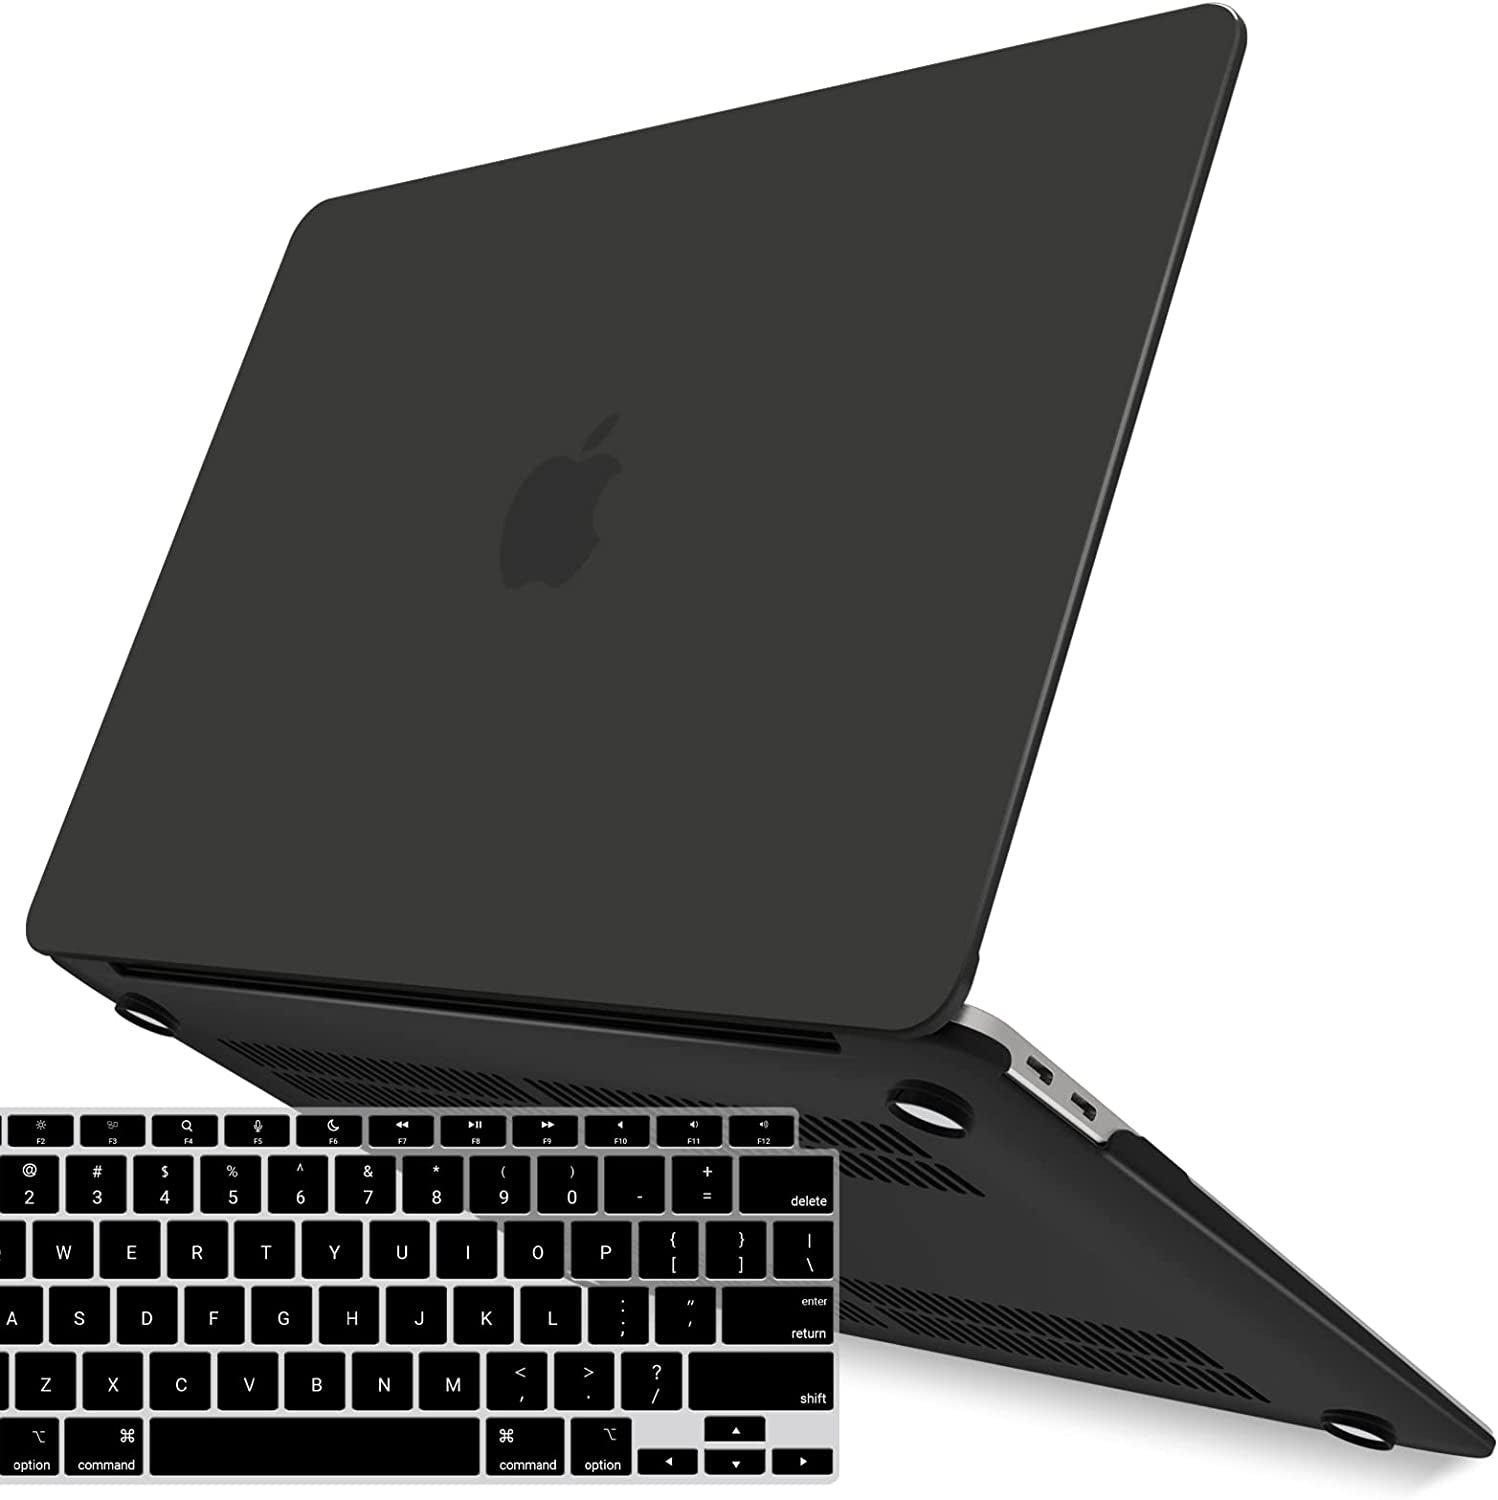 Compatible with New Macbook Air 13 Inch Case 2022 2021 2020 M1 A2337 A2179 A1932, Plastic Hard Shell Case with Keyboard Cover for Mac Retina Display with Touch ID, Black, MMA-T13BK+1A